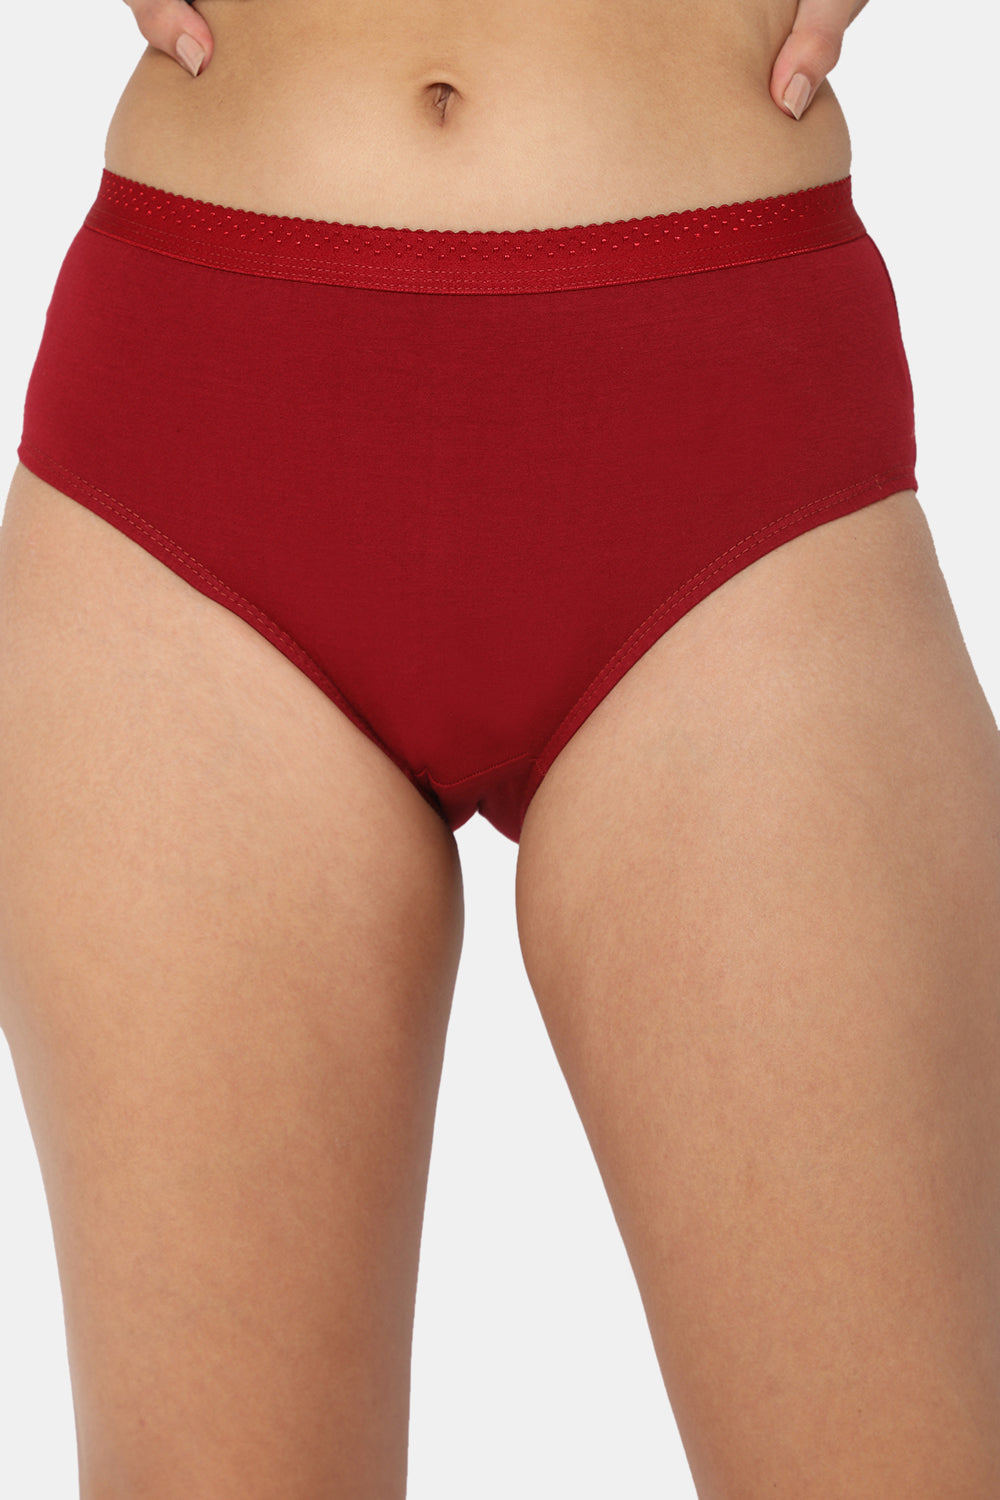 Cotton No Show Underwear Women Womens In The Waist Is Pure Cotton Hollow  Out And Raise The Buttocks Pure Brief Panties, A, Medium : :  Clothing, Shoes & Accessories